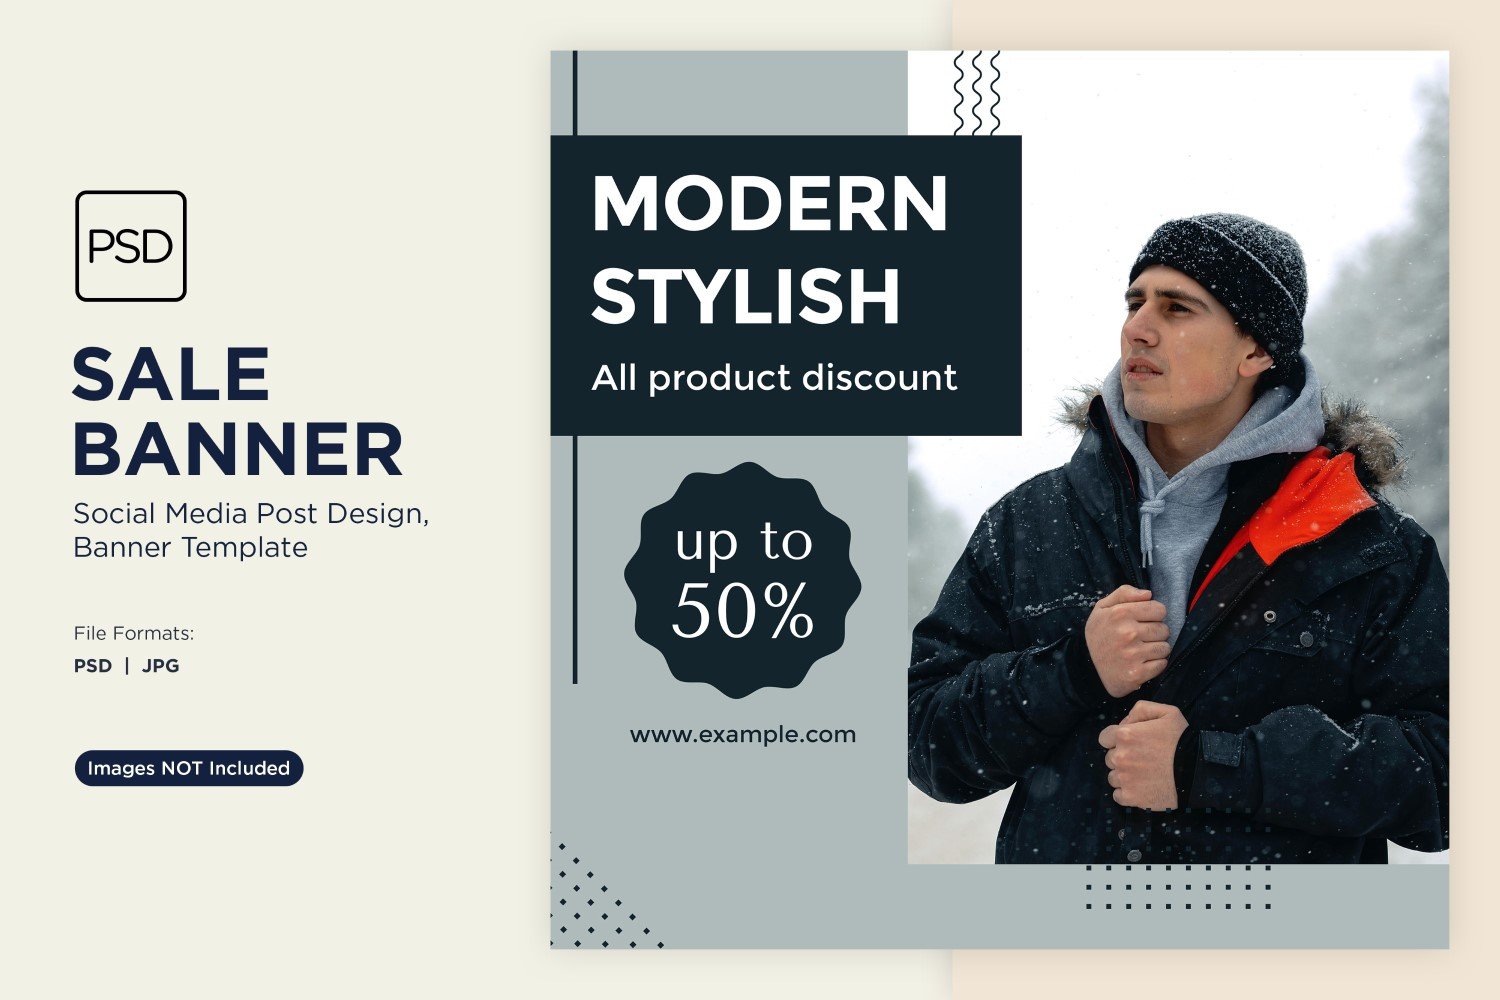 Hot Deals for Cool Days Winter Sale Specials Design Template